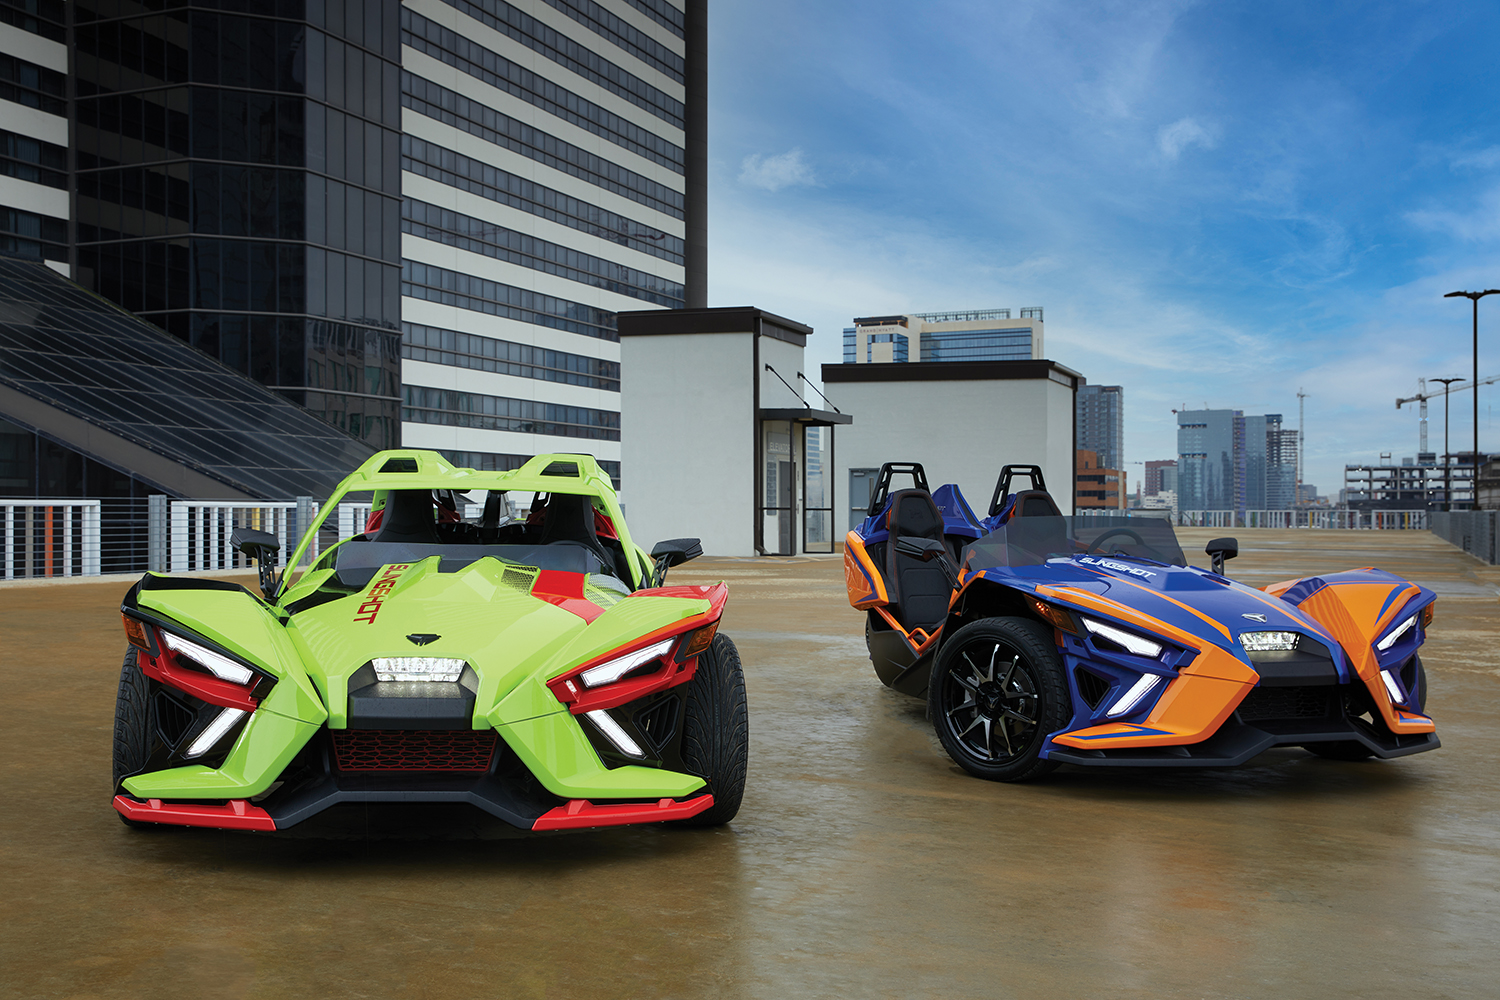 The Slingshot's sporty, futuristic styling gives it amazing curb appeal.  When you pull up to a stop light or an event, and you'll easily become the talk of the town.  Shown here are the R - LE models.